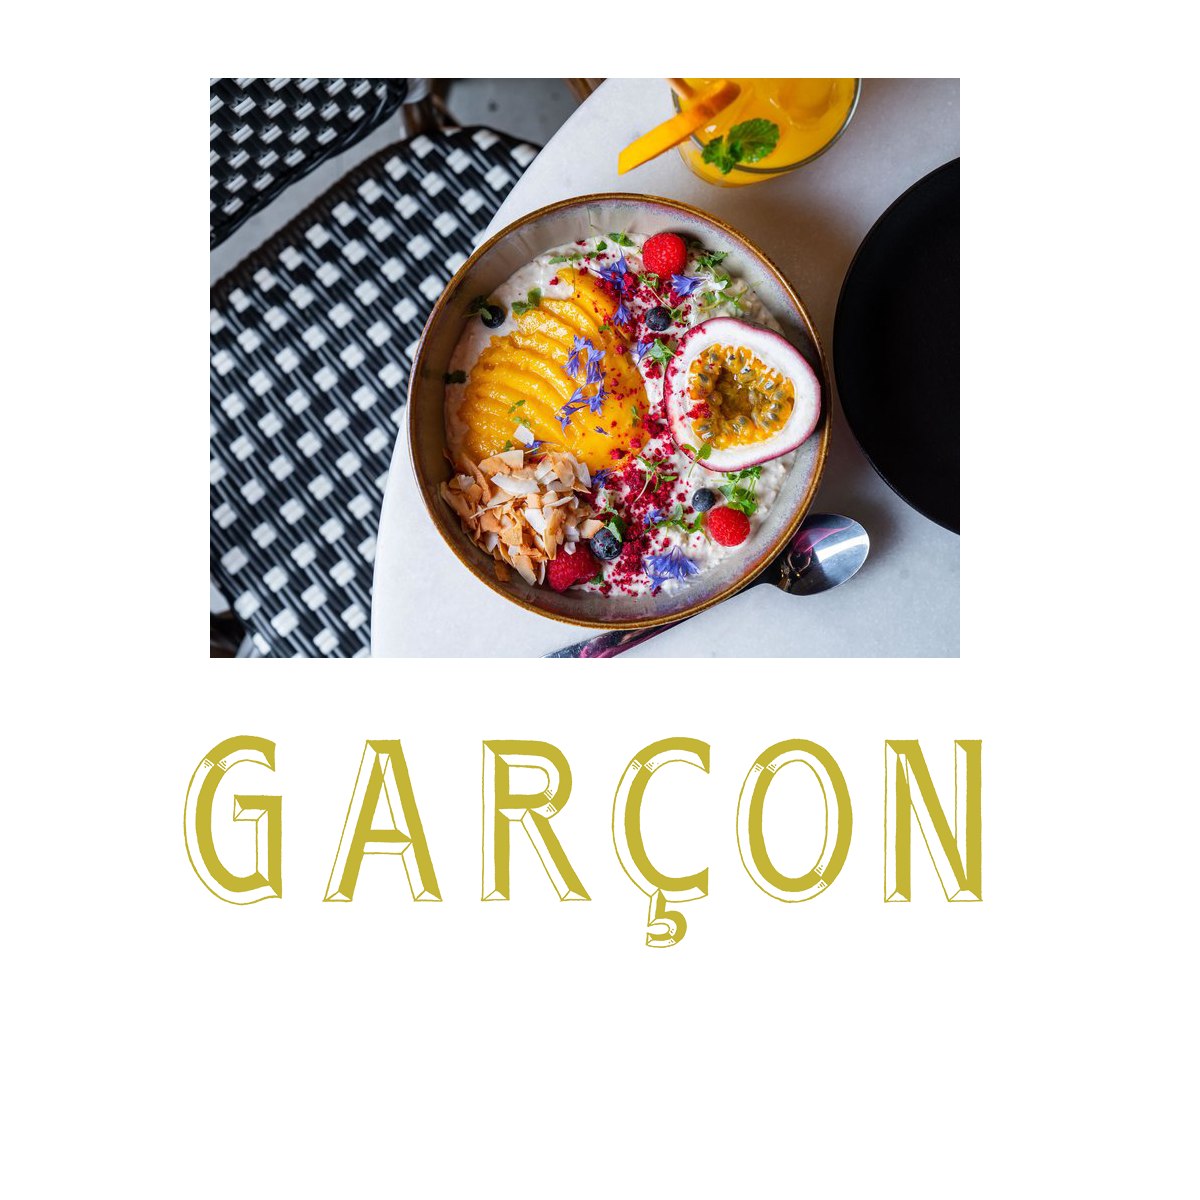 Best French Restaurant in Lane Cove- Garcon,Lane Cove,Hotels & Resorts,Resorts,77traders